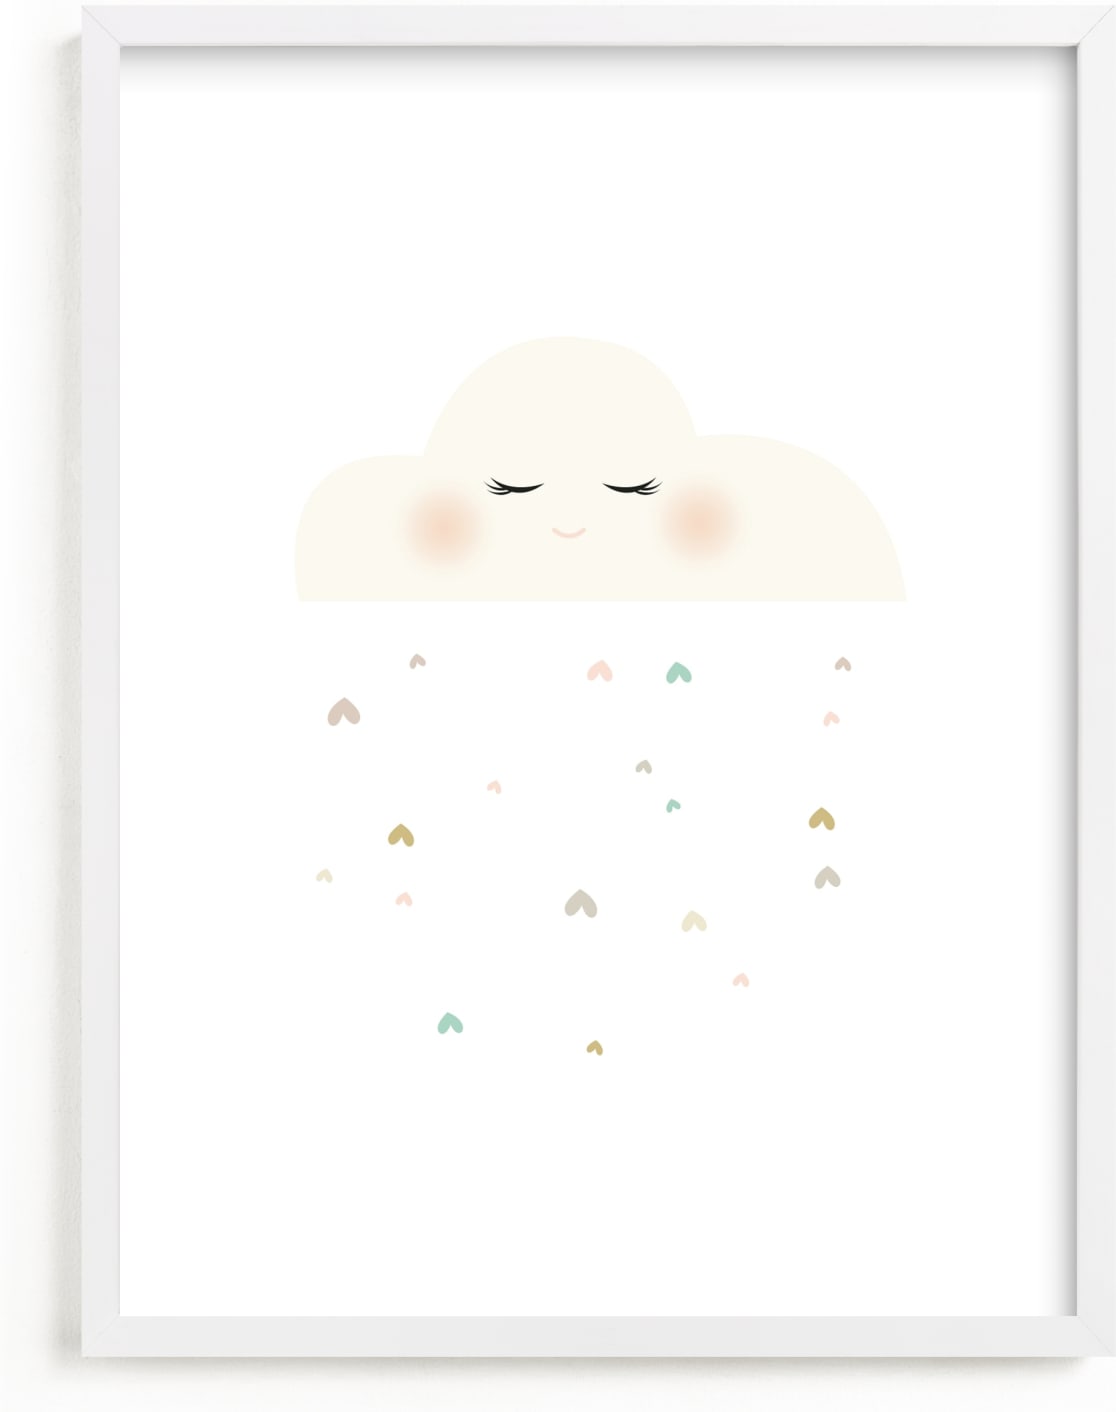 This is a ivory nursery wall art by fatfatin called Miss Cloud.